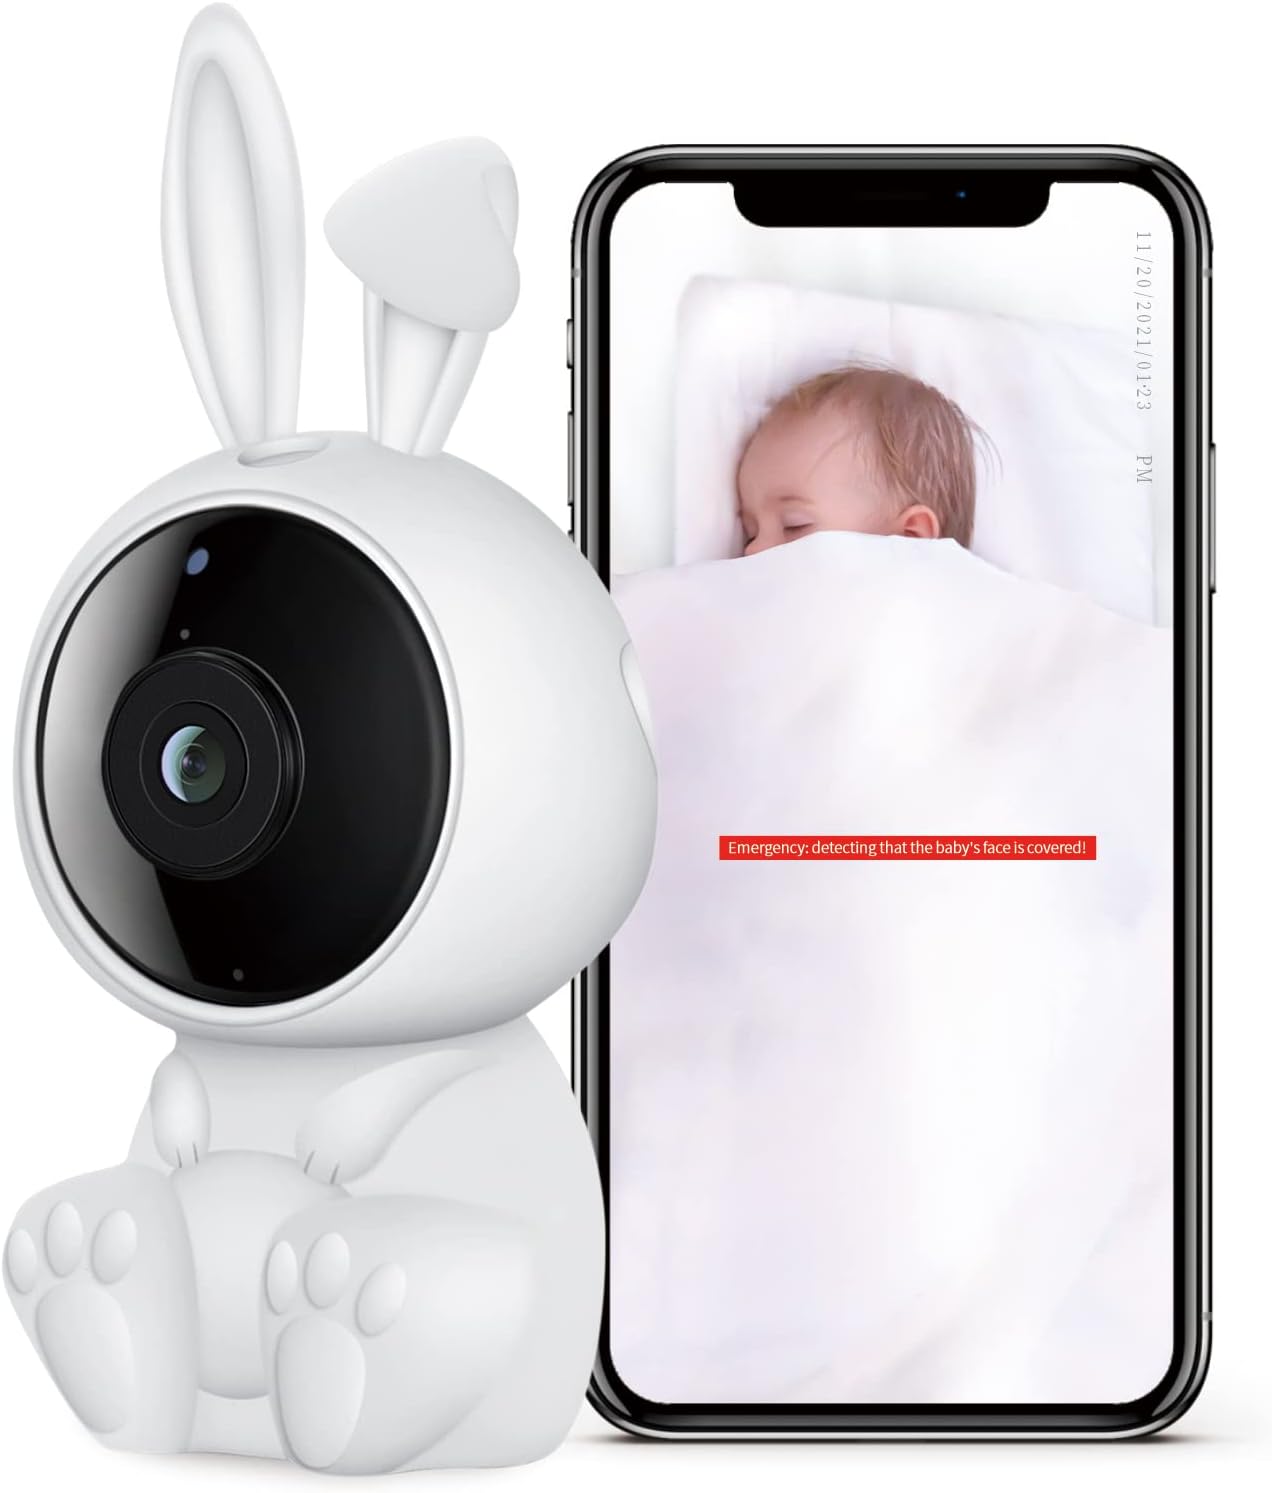 Advanced Smart Baby Monitor - Buy Advanced Smart Baby Monitor in Dubai - HOCC Dubai - Baby playground outdoor - Shop baby product - Shop Pet product - shop home decor and lighting- Buy baby playpen in Dubai - HOCC Dubai - Baby playground outdoor - Shop ba